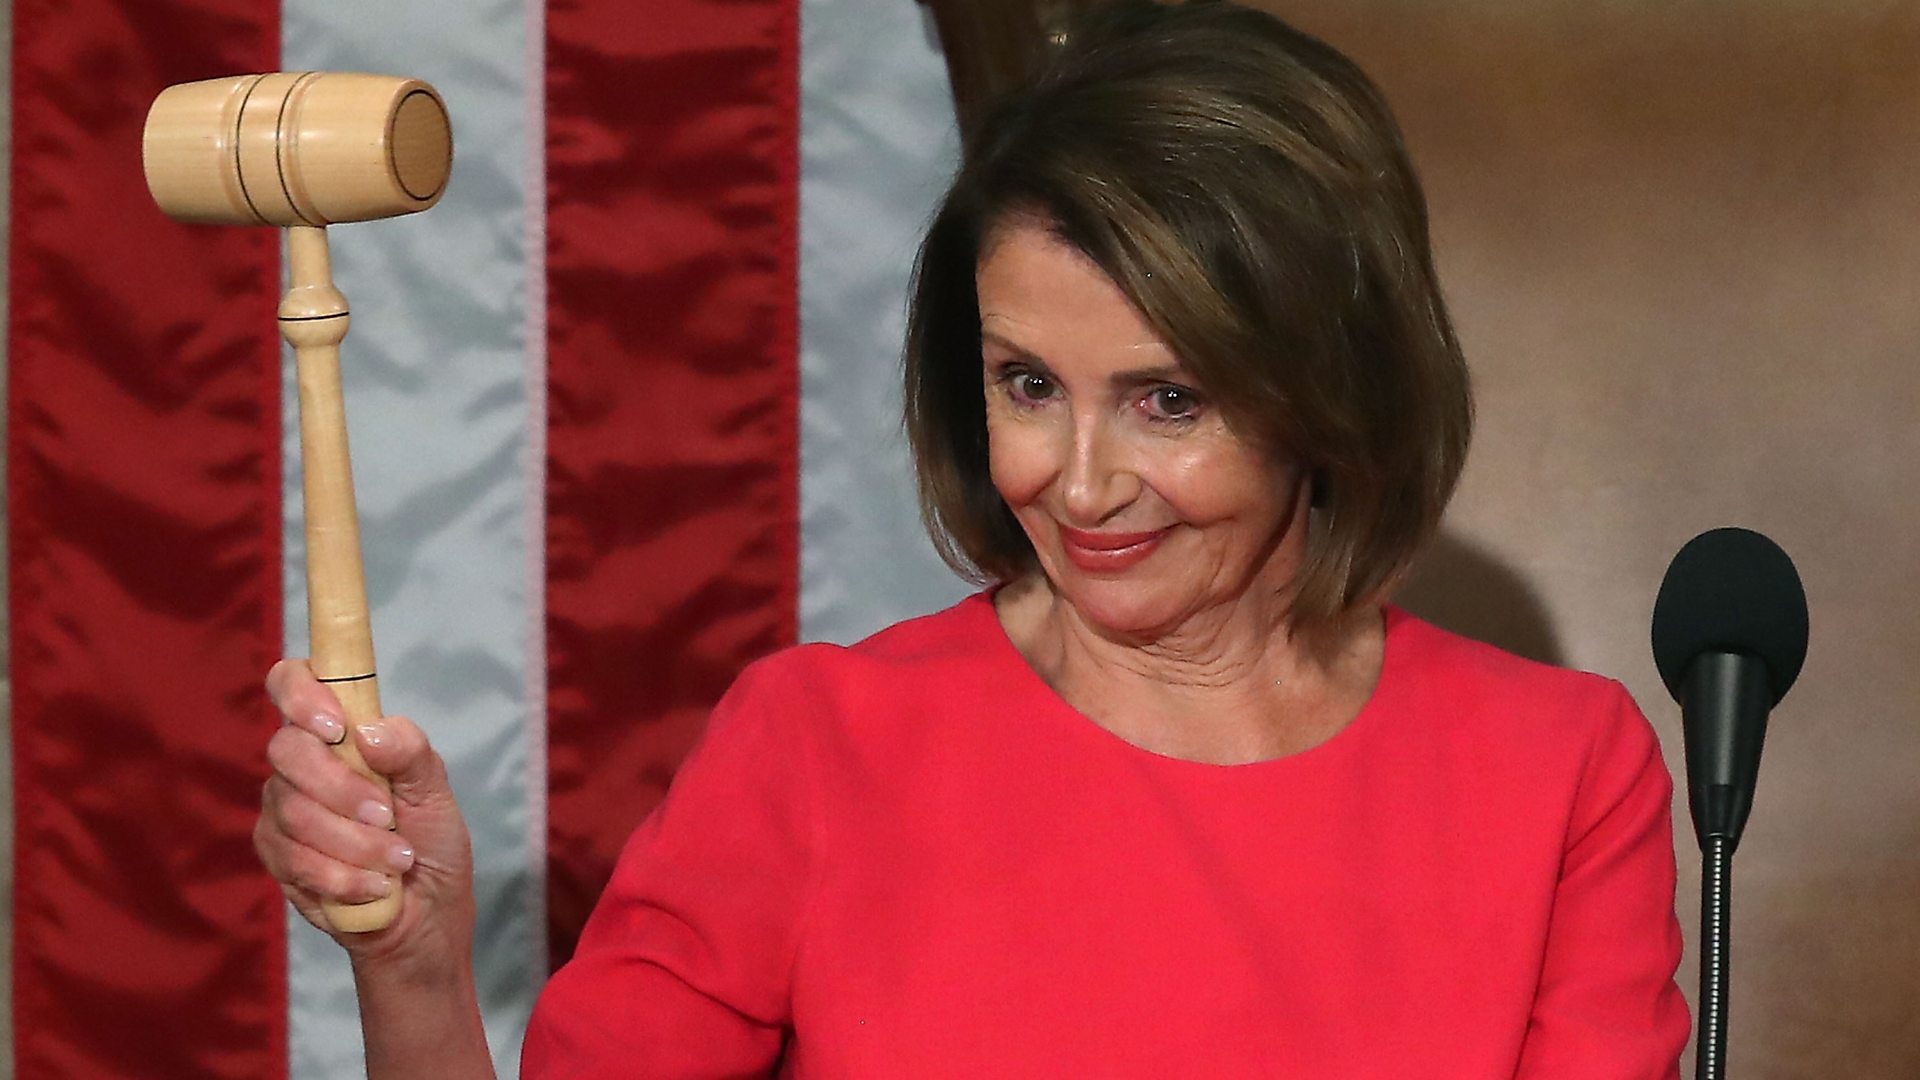 Speaker Nancy Pelosi quotes Ronald Reagan after accepting gavel